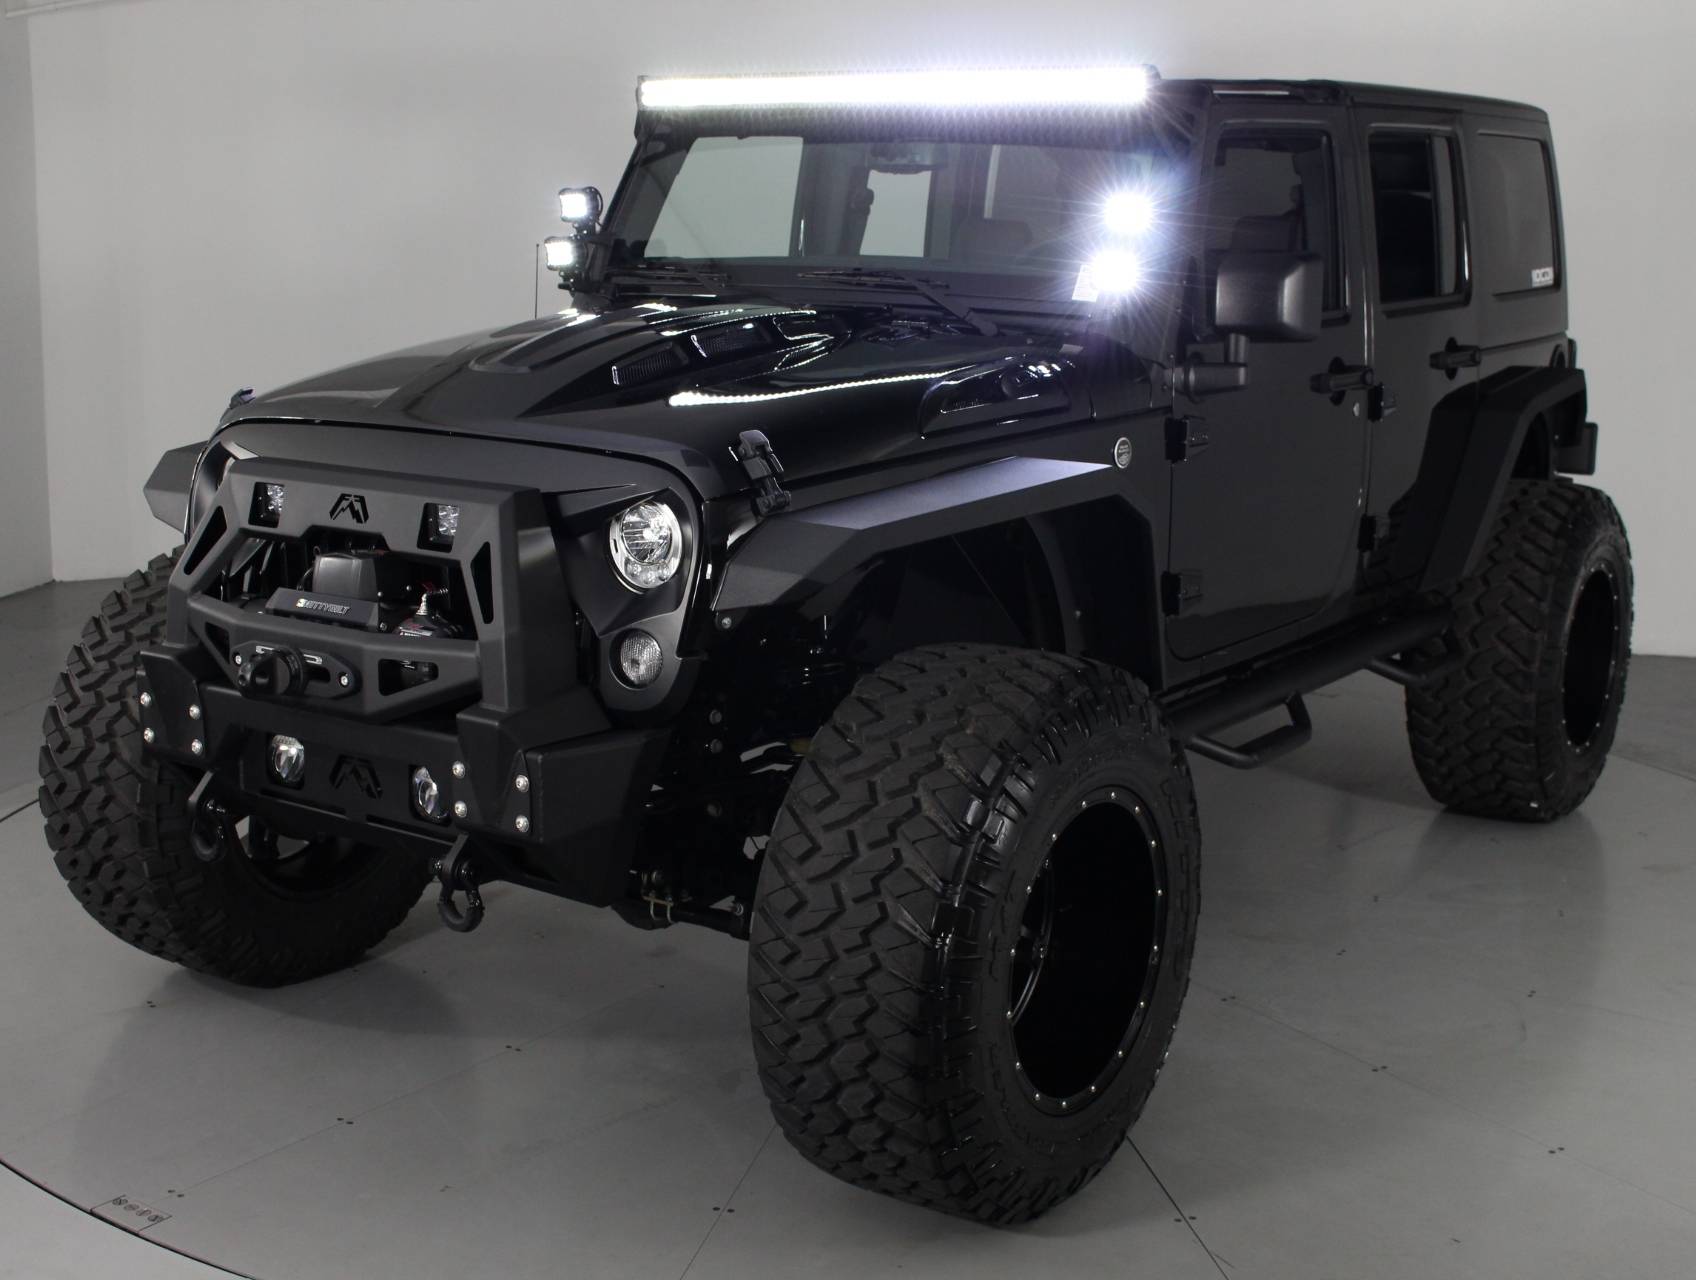 Florida Fine Cars - Used JEEP WRANGLER UNLIMITED 2017 HOLLYWOOD RUBICON